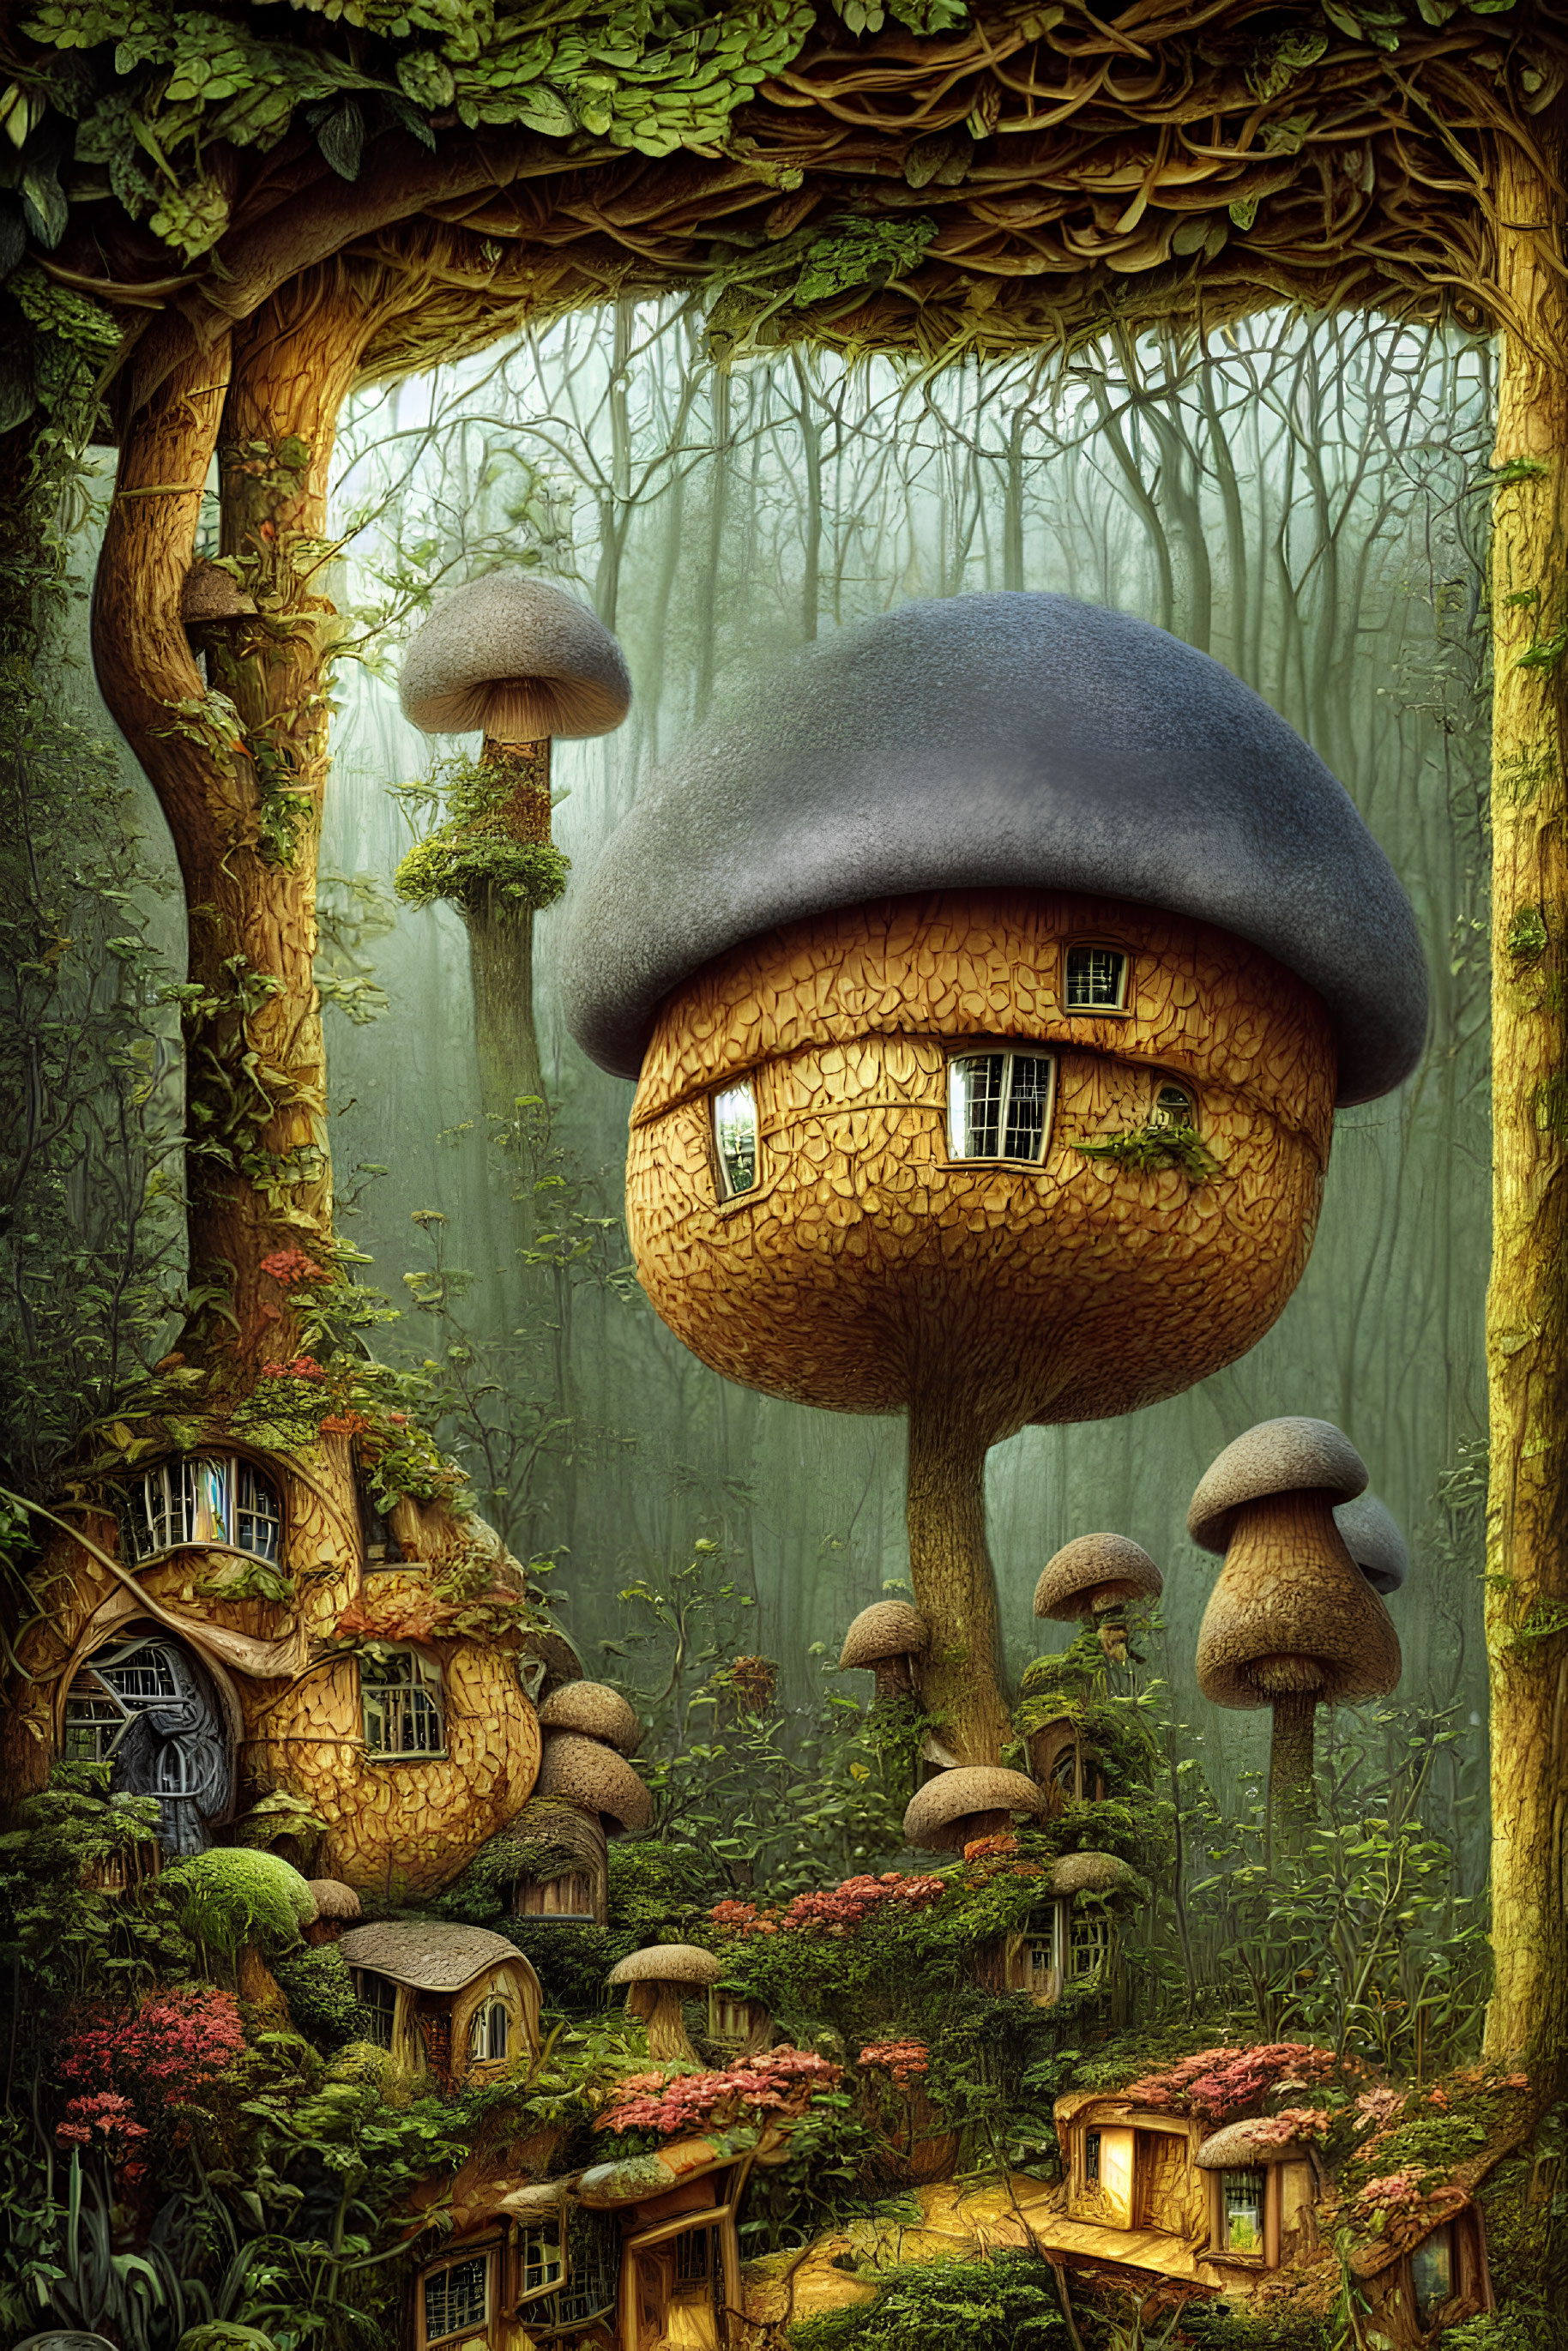 Enchanting forest with mushroom houses in magical setting